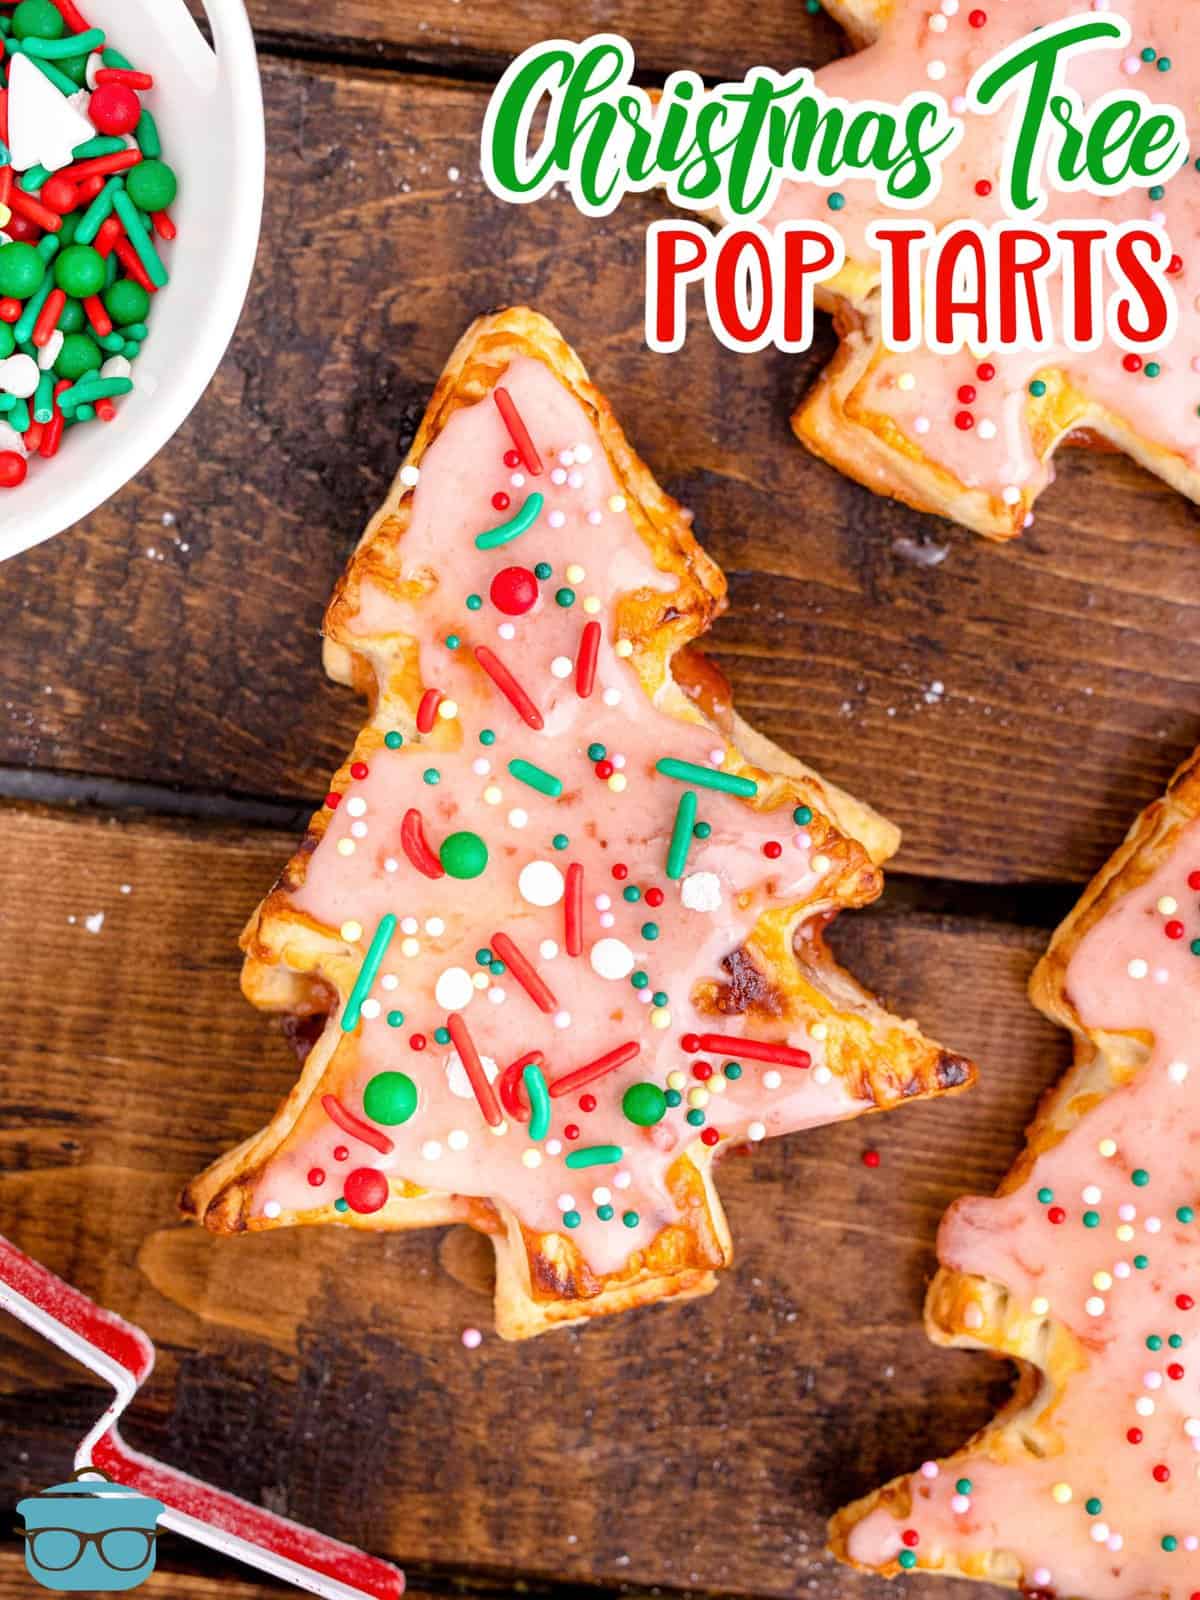 Pinterest image overhead of one finished of the Christmas Tree Pop Tarts.